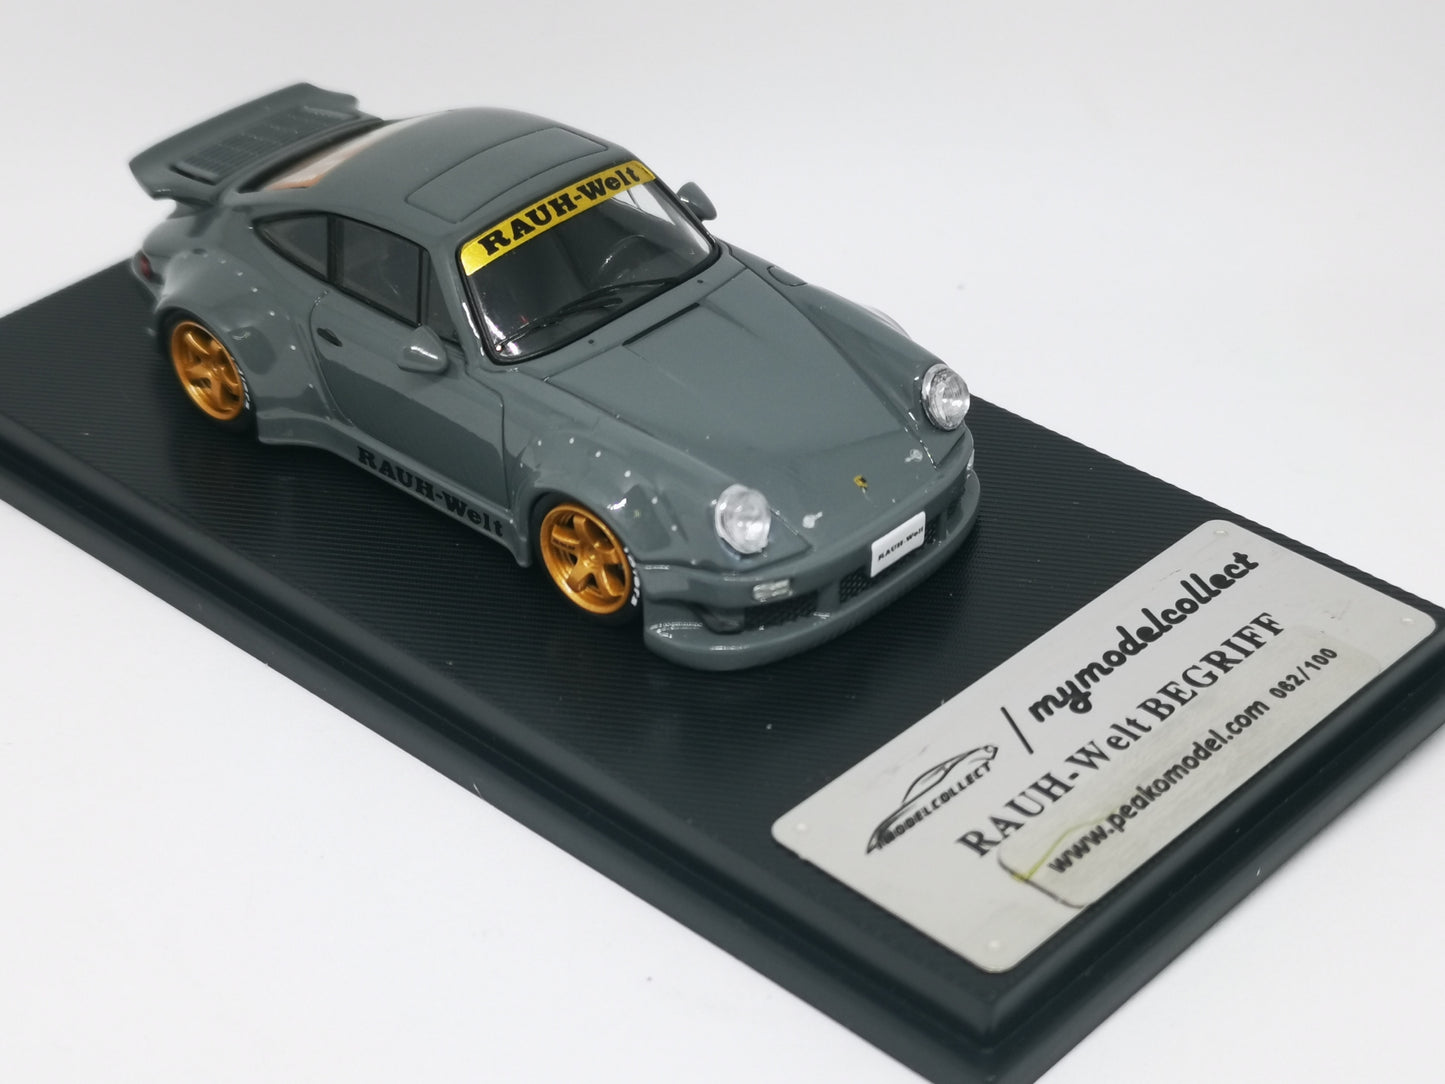 Model Collect RWB Porsche 930 3.8 Type Wing Clement Grey 1:60 SCALE Limited at 100pc Model Collect